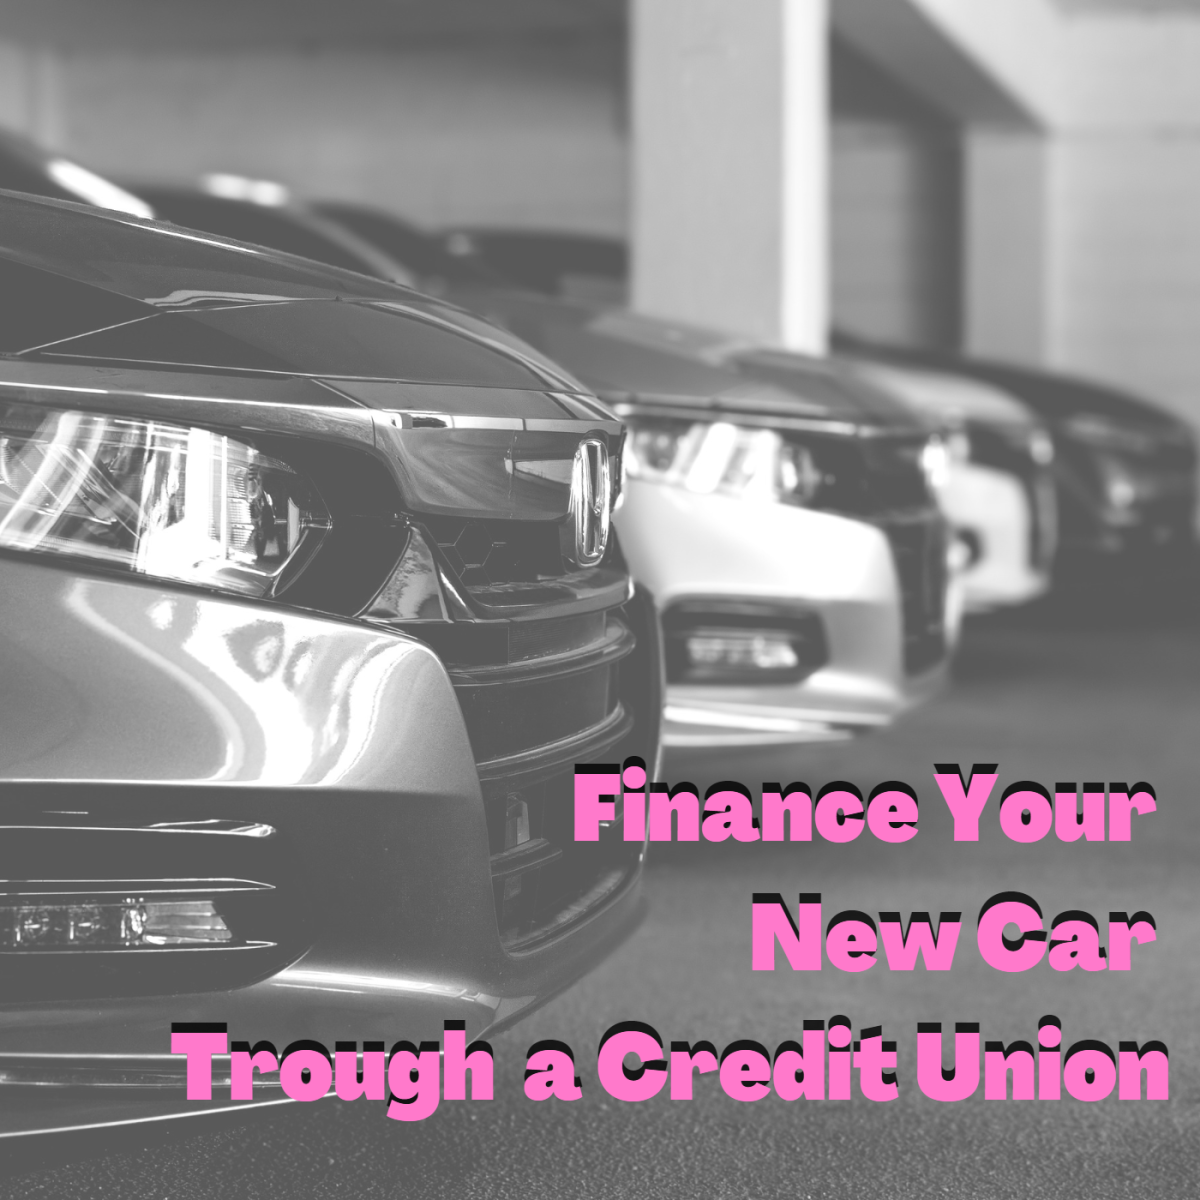 Using a Credit Union to Finance Your Next Car Purchase